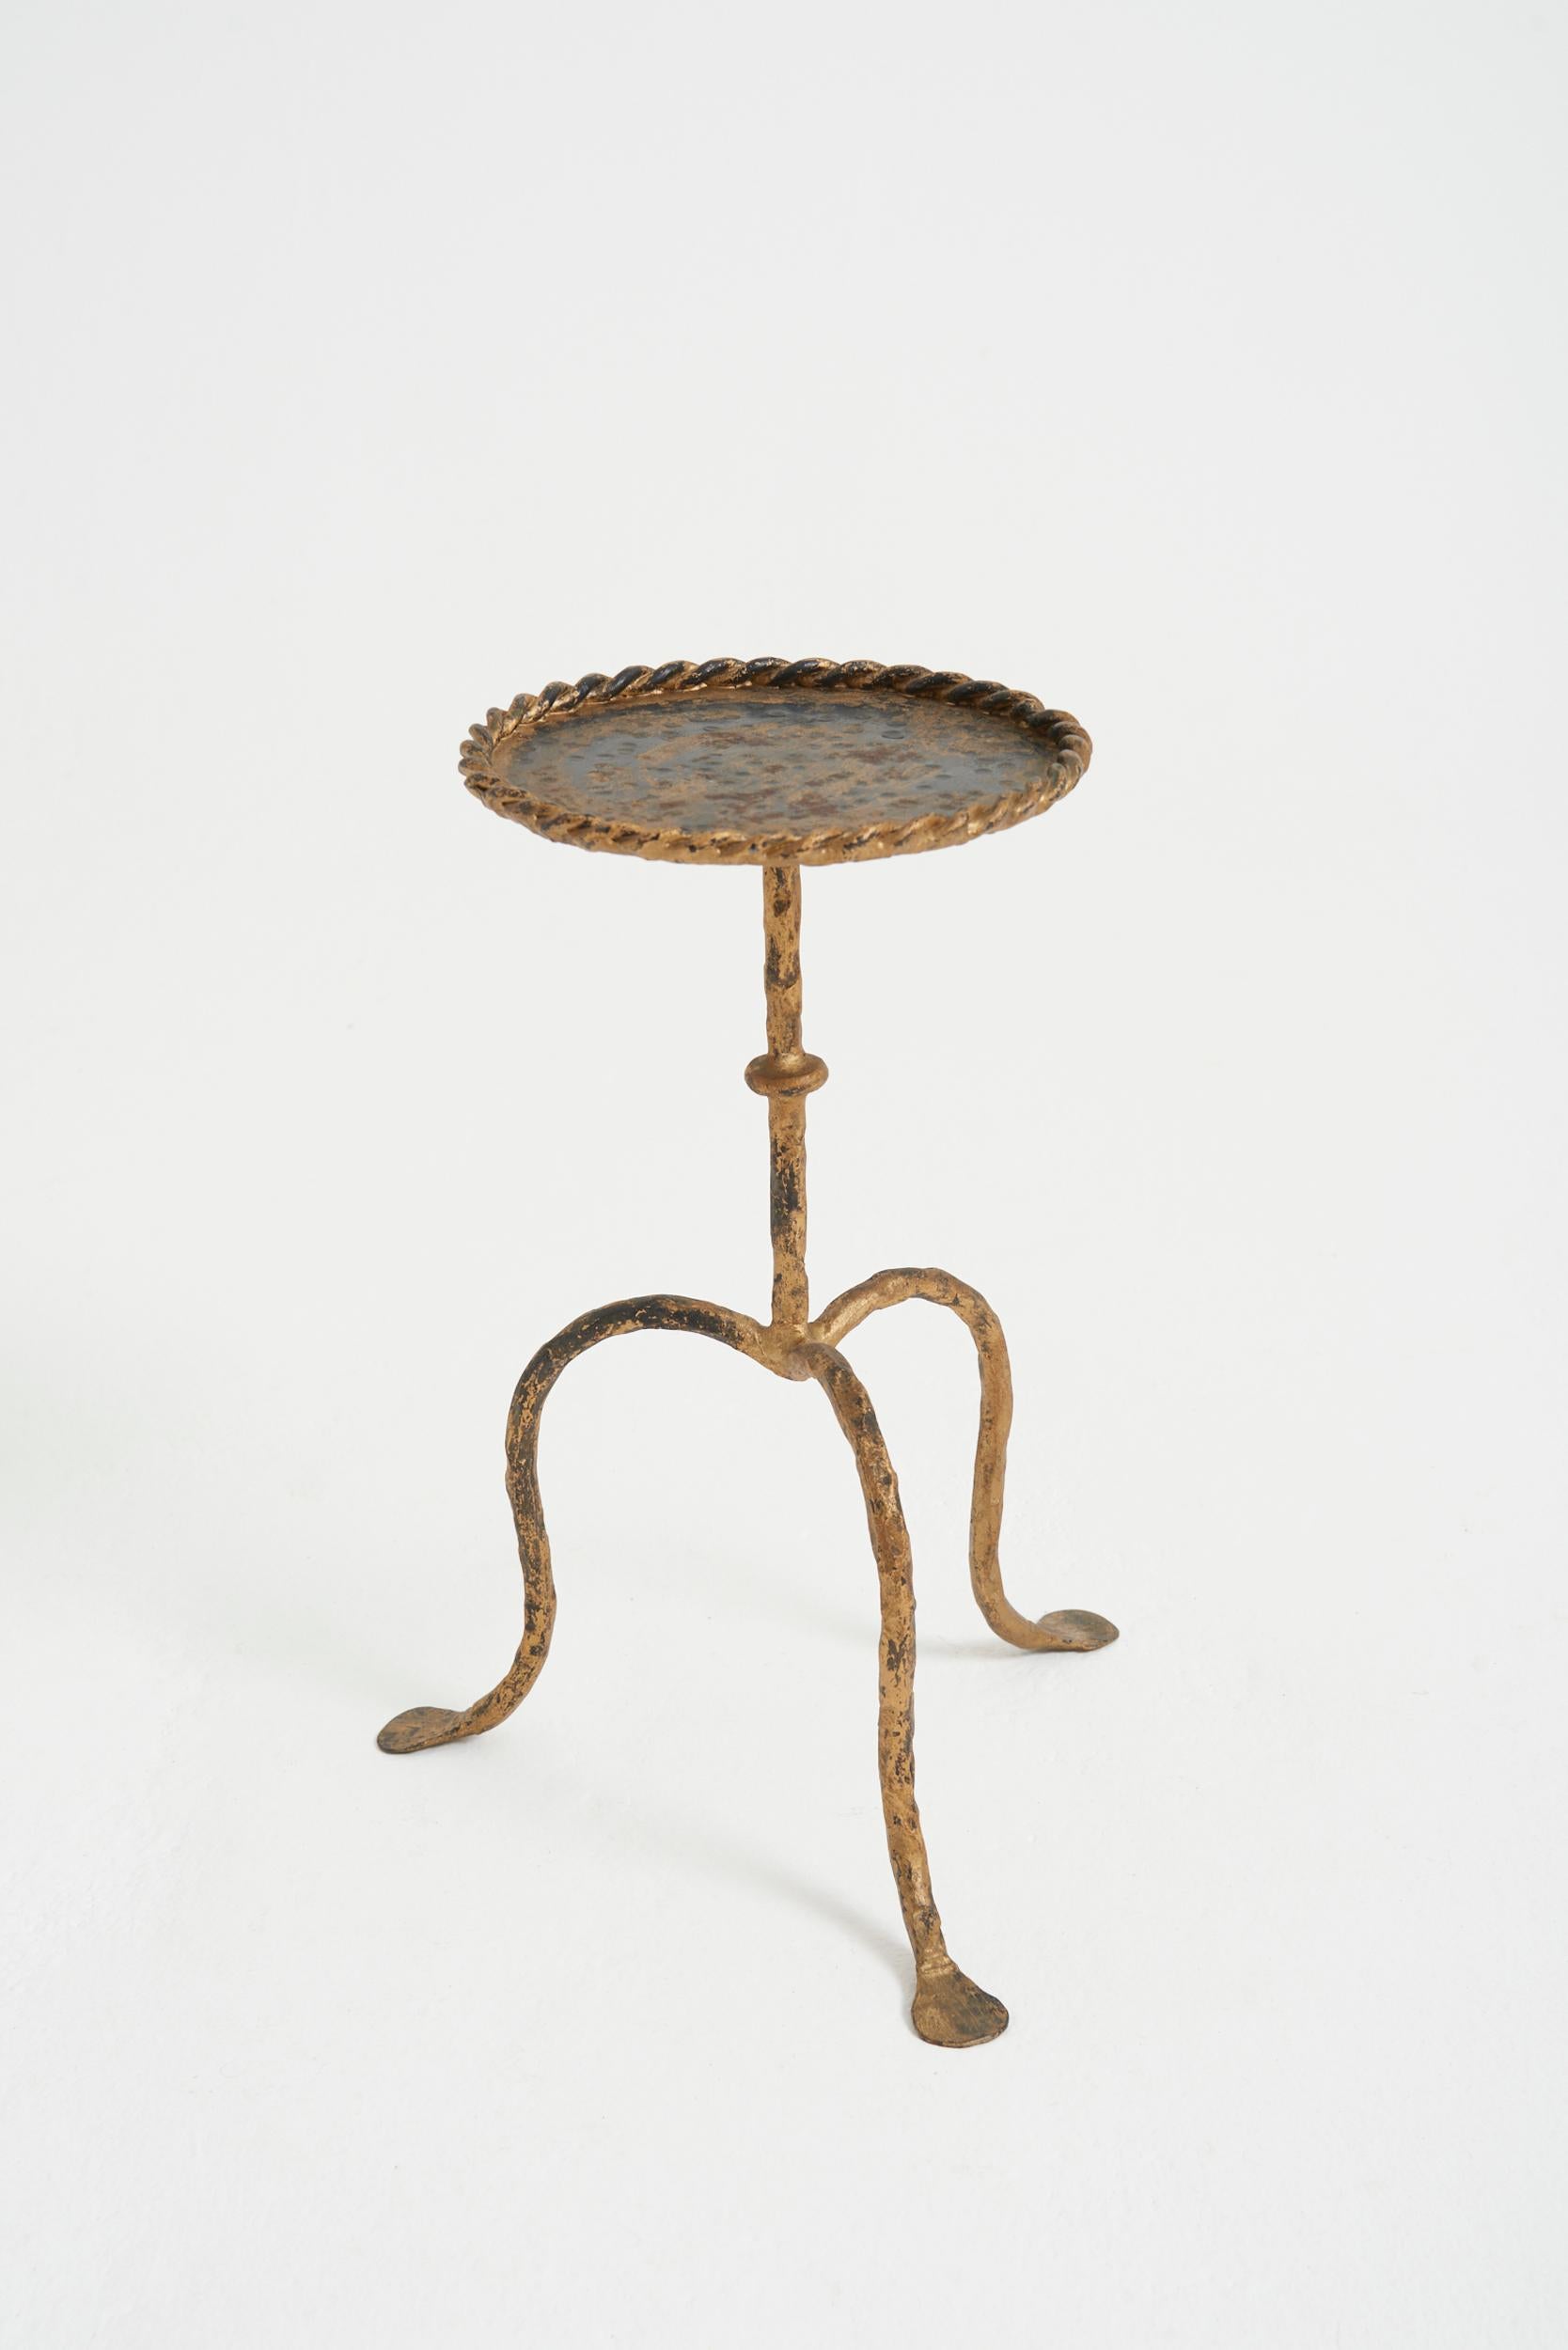 A gilt wrought iron martini table, of unusually reductive proportions
Spain third quarter of the 20th Century
40 cm high by 20.5 cm diameter